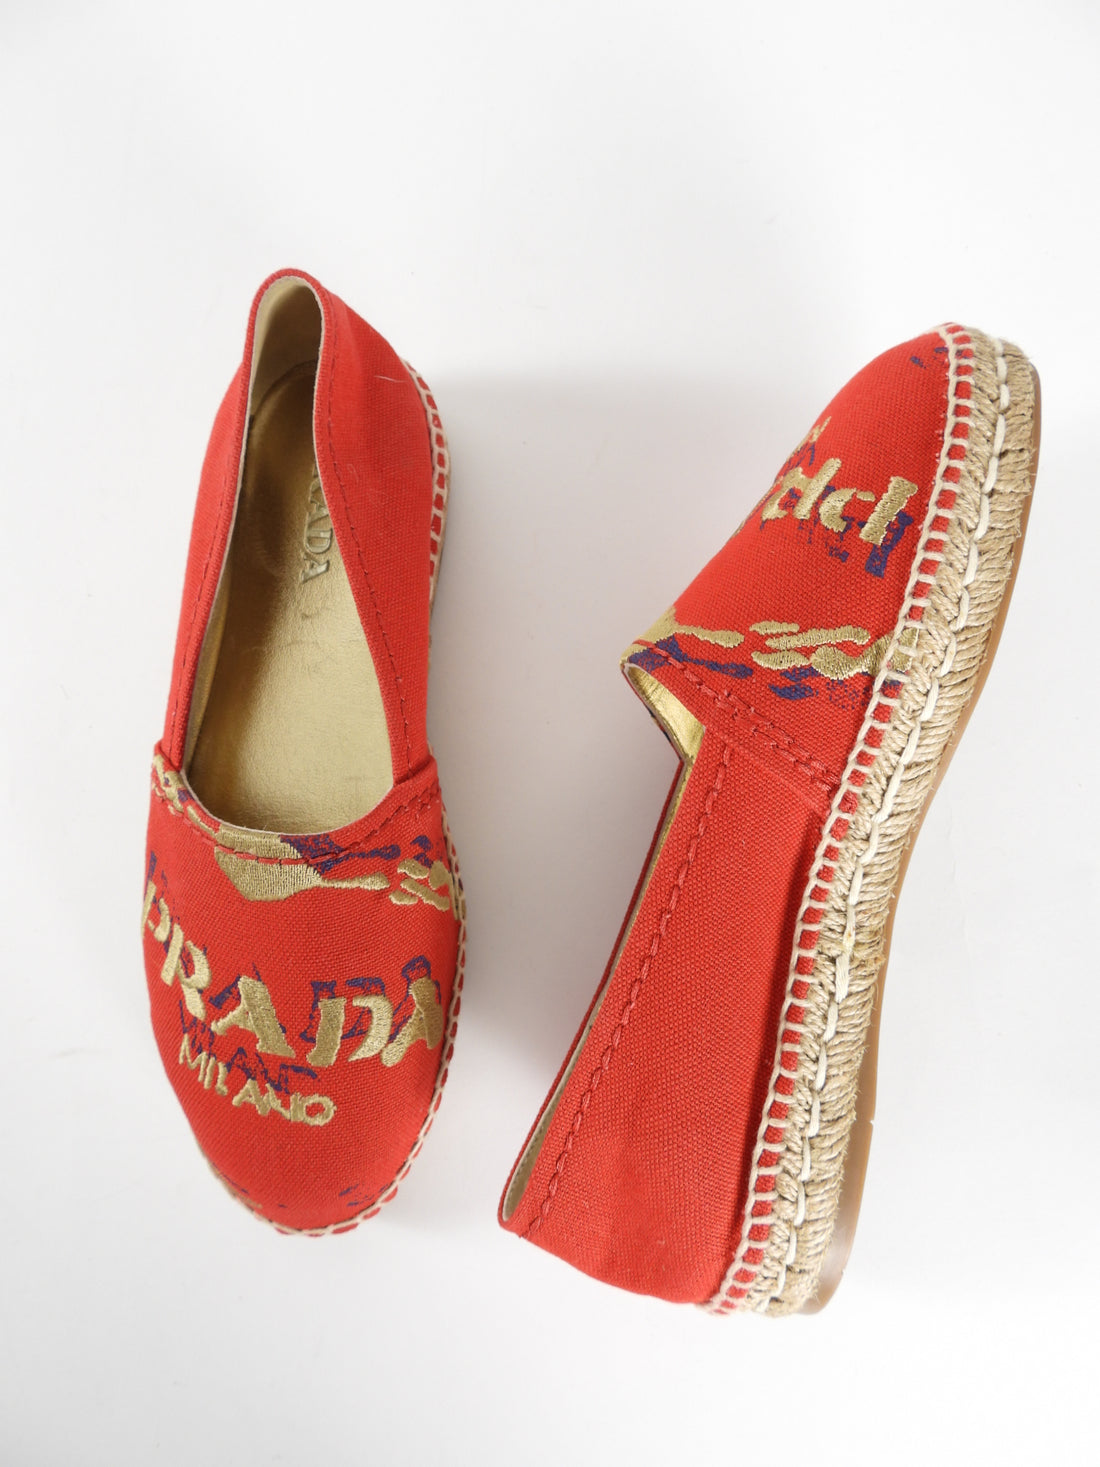 Prada Red Canvas and Gold Embroidered Logo Espadrille Flats - 37.5 / 7.5